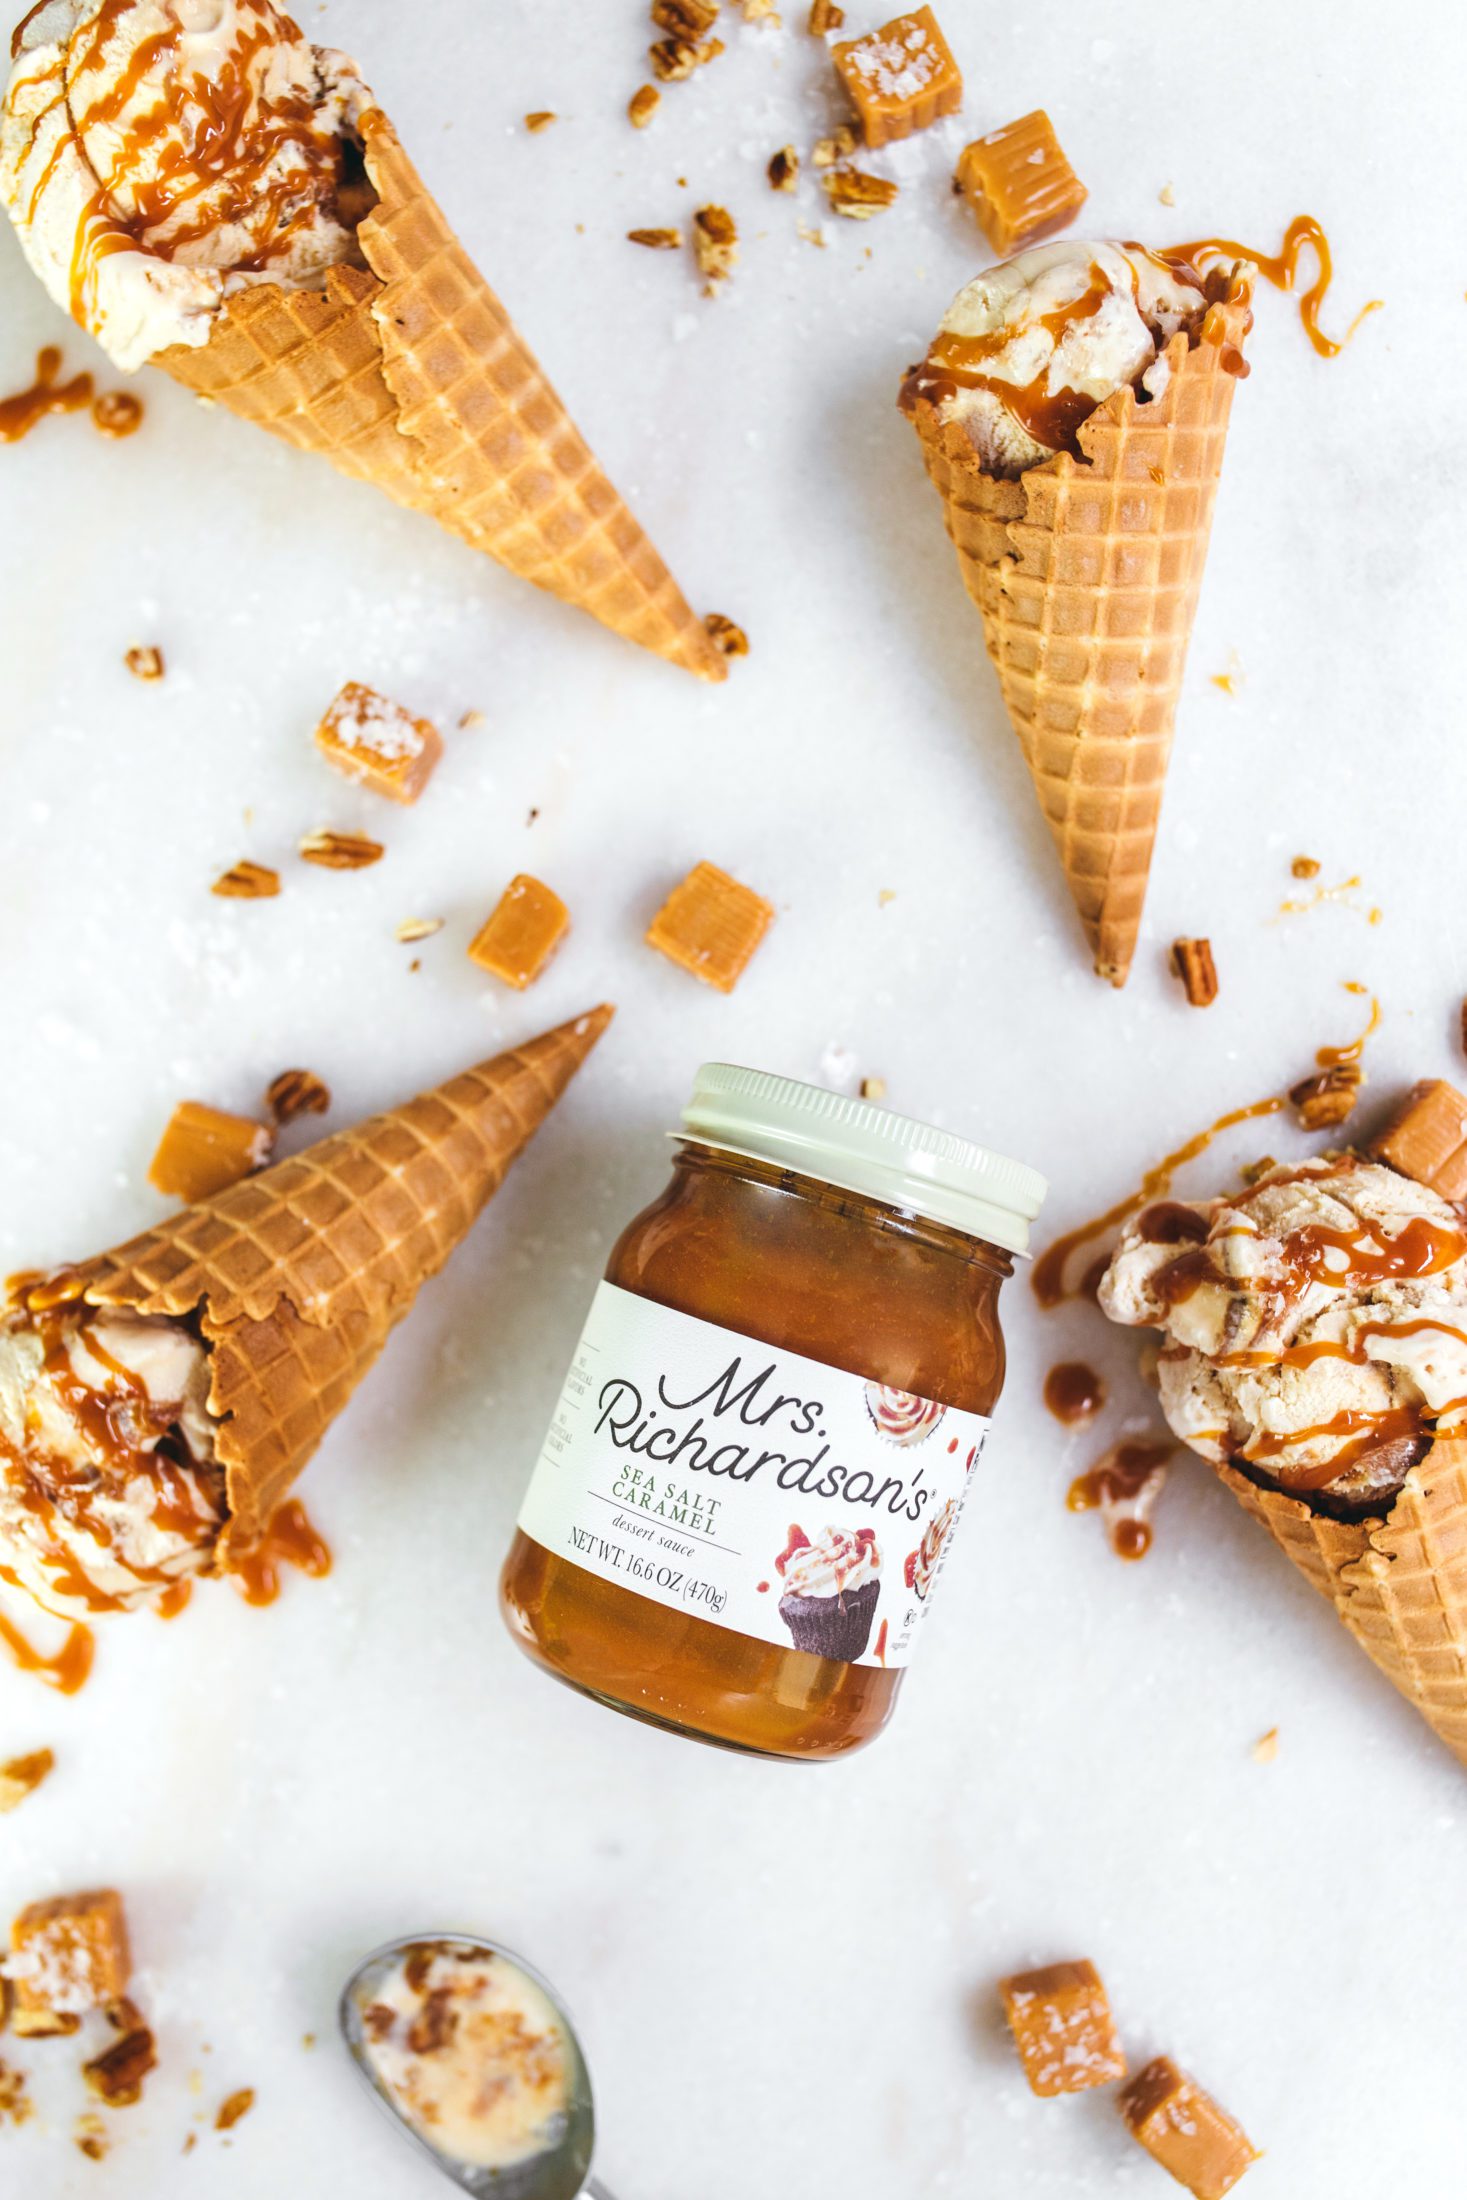 An overhead view of Mrs. Richardson's Sea Salt Caramel dessert sauce jar surrounded by sea salt caramel ice cream waffle cones and pieces of caramels on a marble surface.